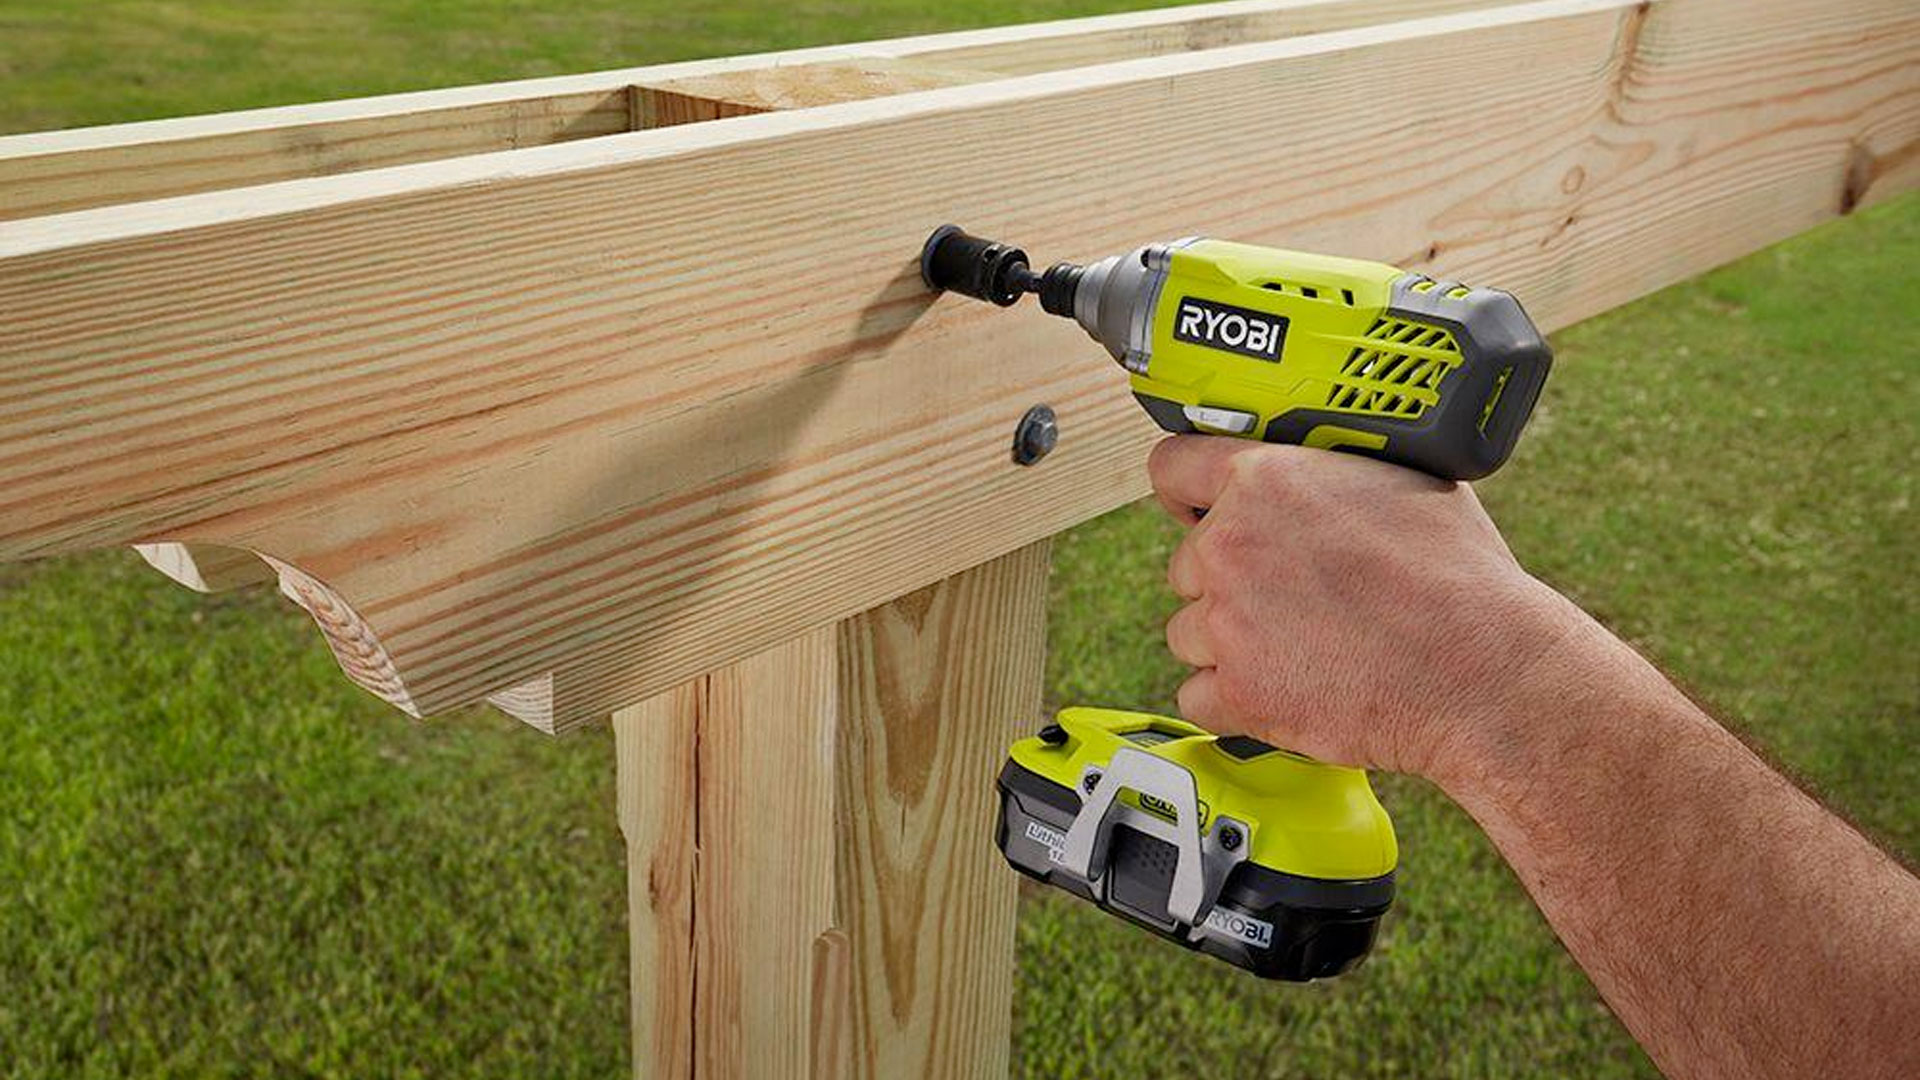 For $99, every DIYer should have Ryobi's drill/driver + impact ($50 off)